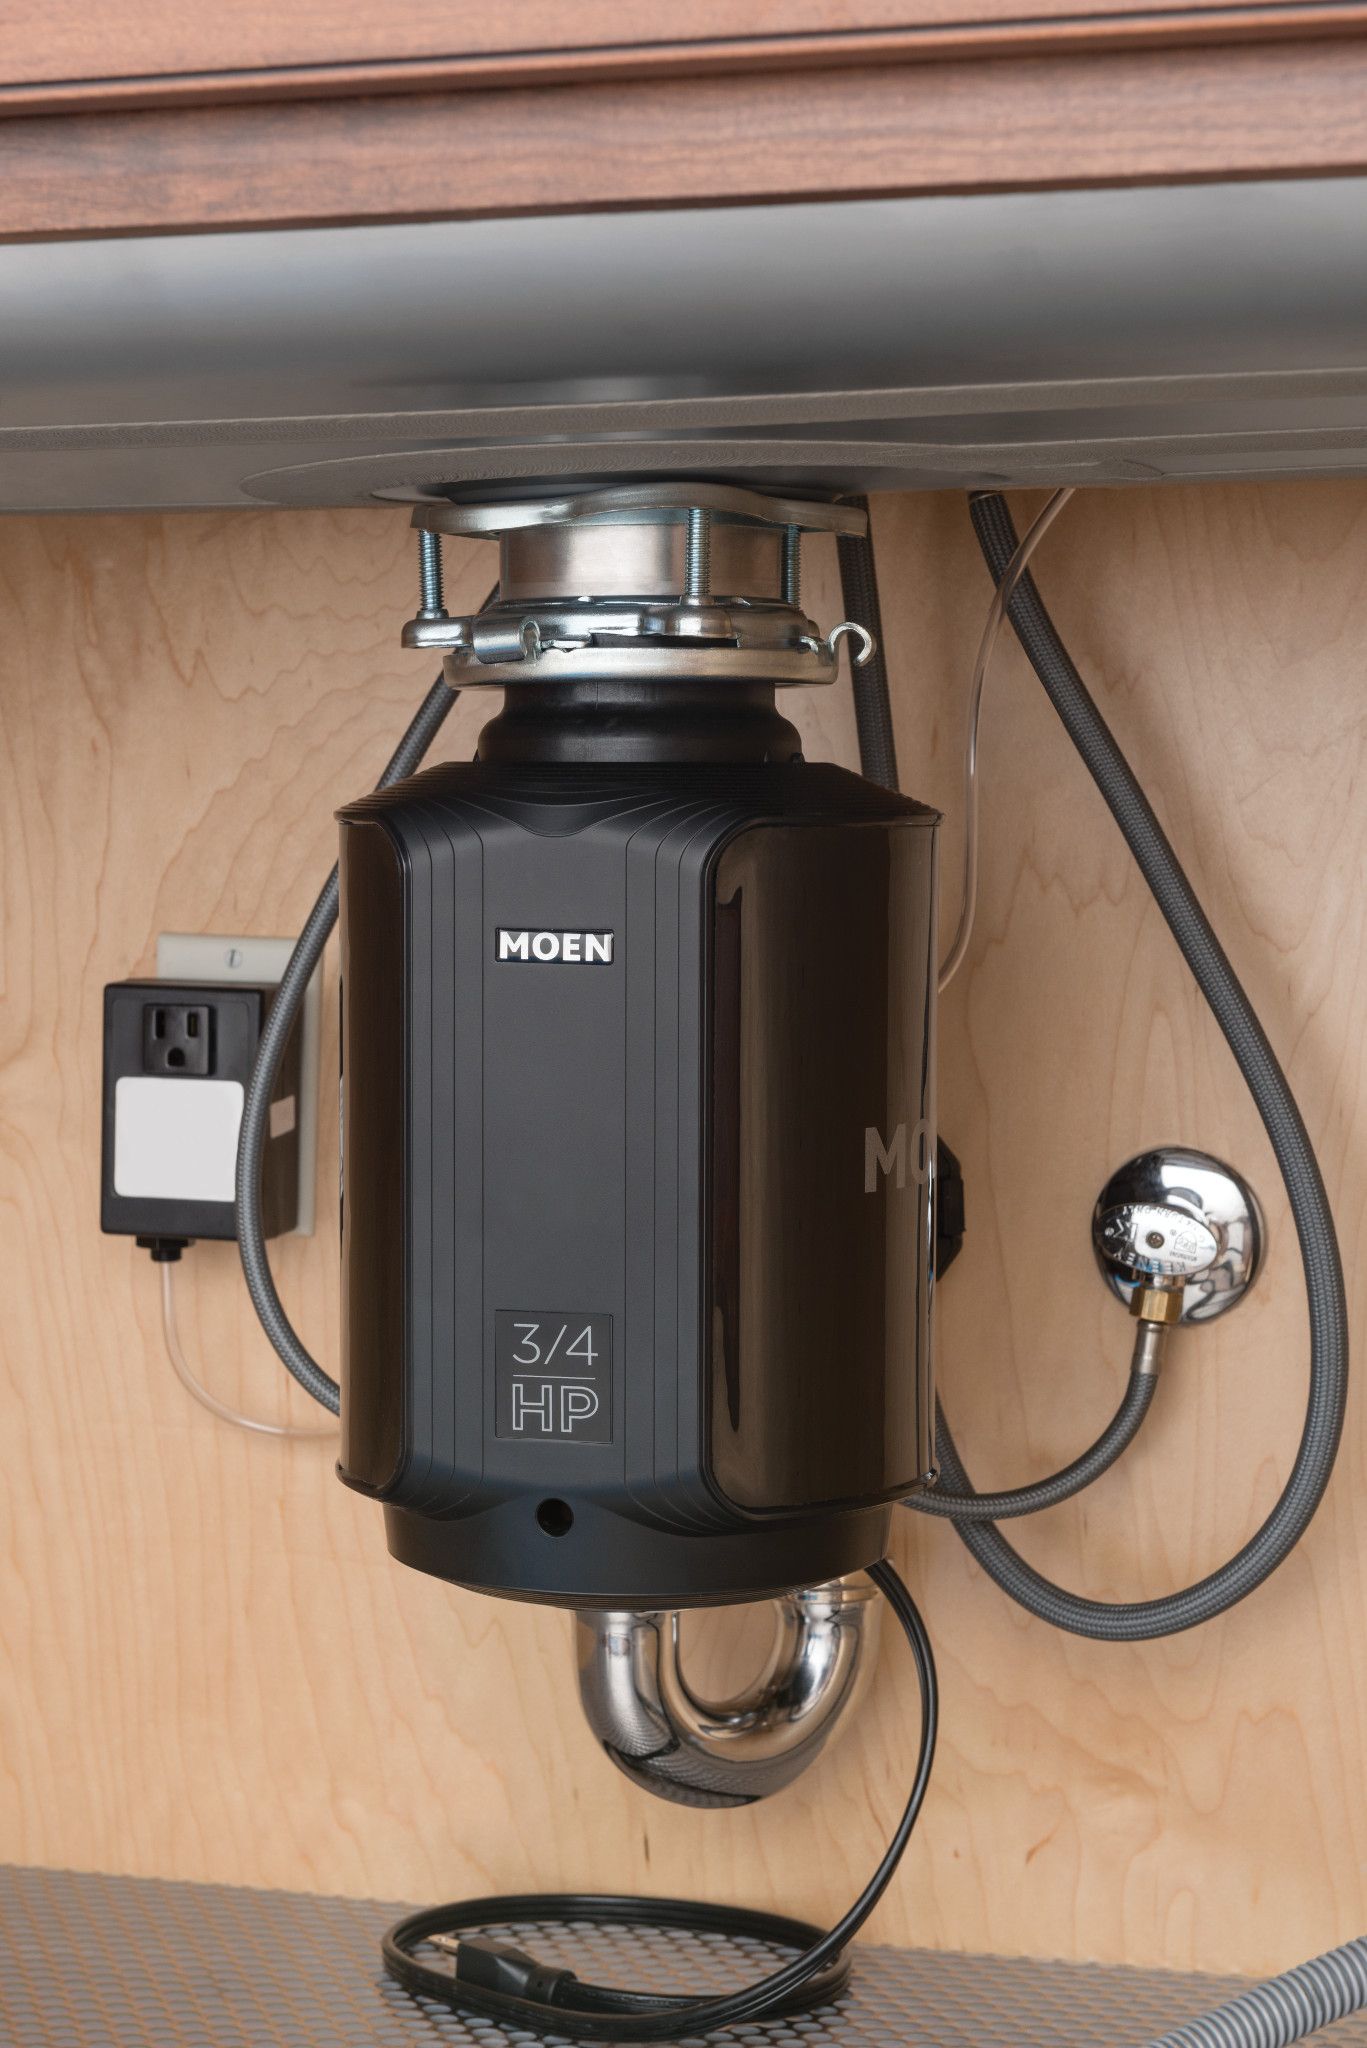 Moen Host Series 3/4 HP Continuous Feed Garbage Disposal with Sound Reduction for Kitchen Sink